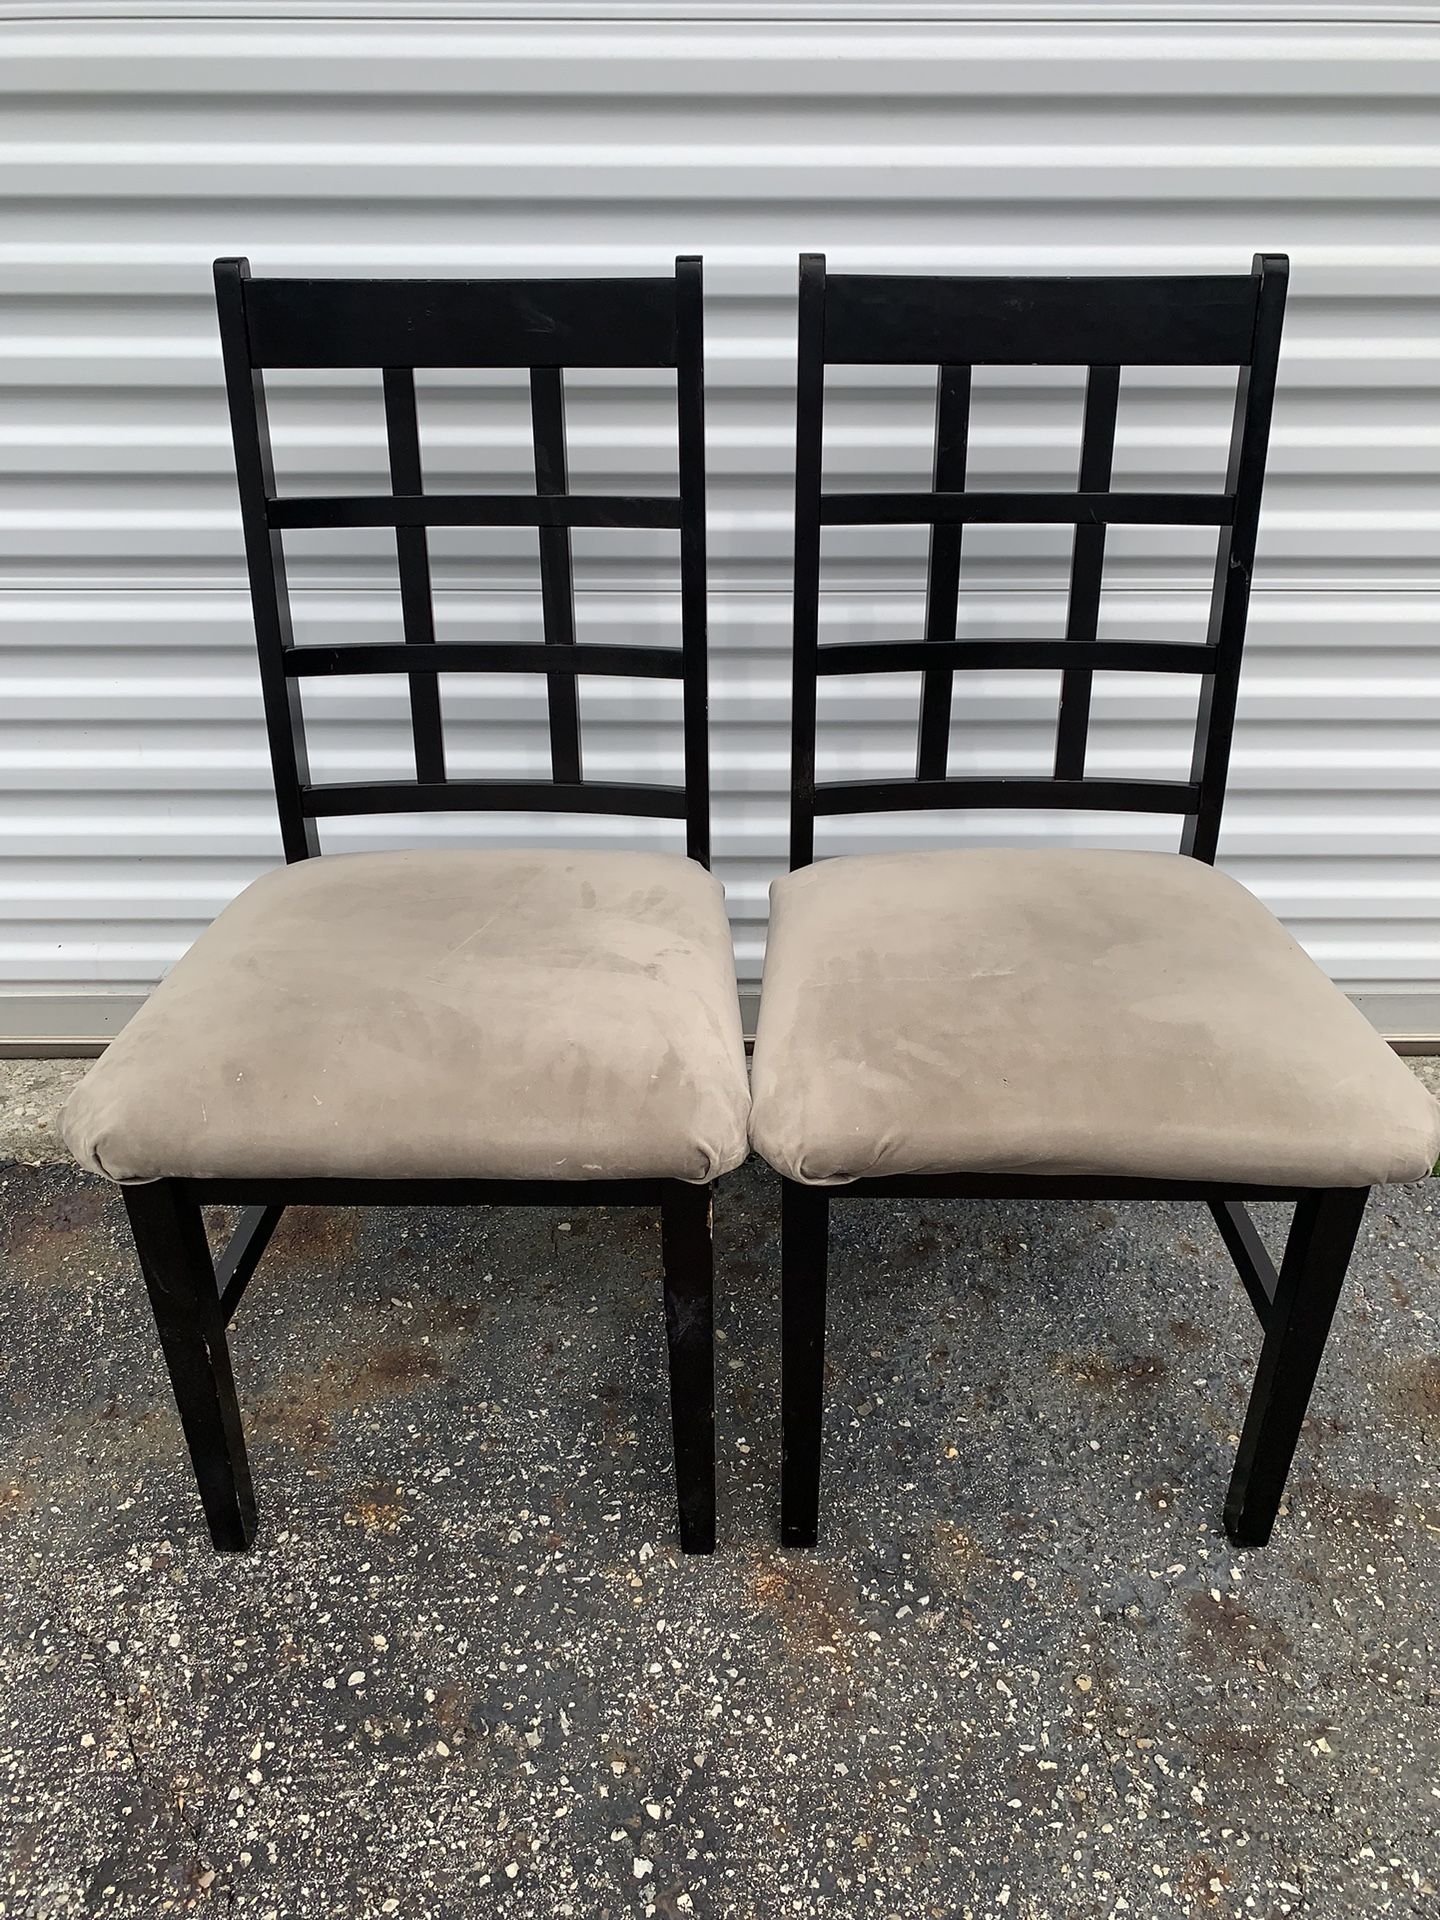 Set of 2 Wooden Padded Kitchen Chairs in Black/Tan 